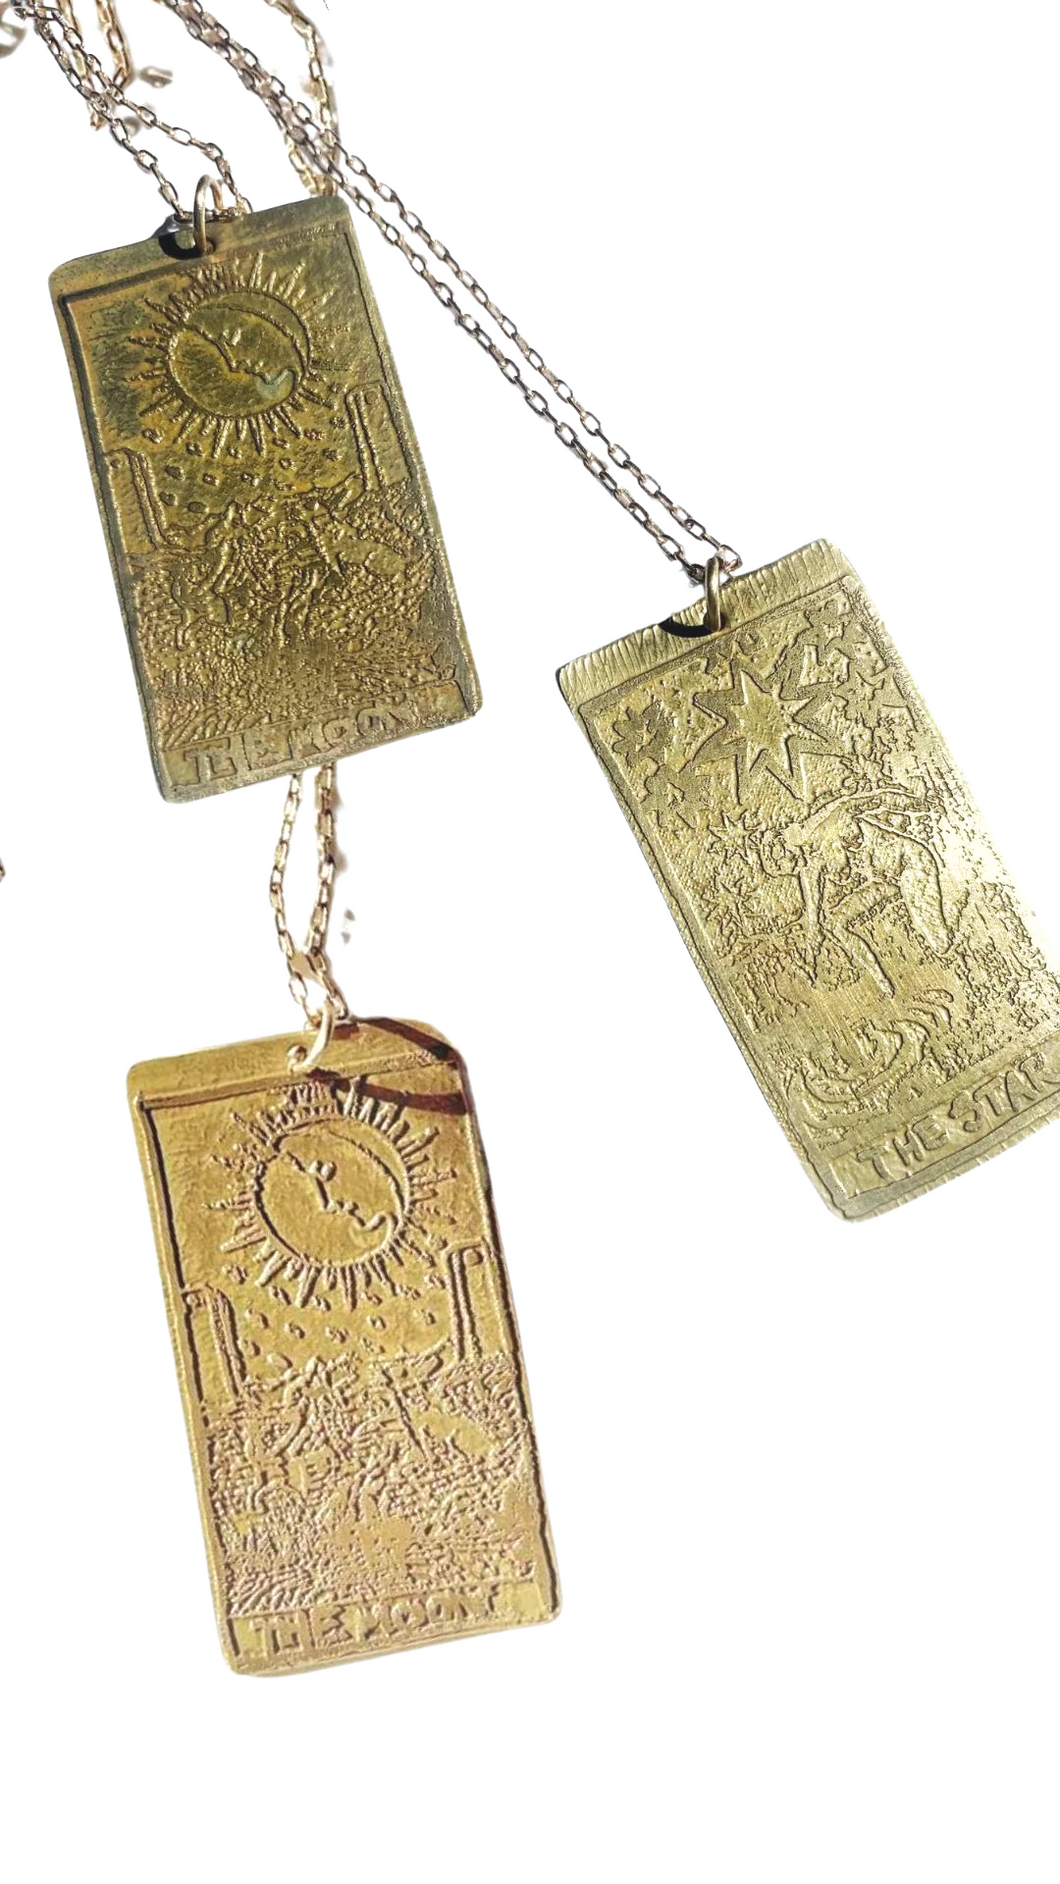 Major Arcana Etched Tarot Necklace by Storm & Stress